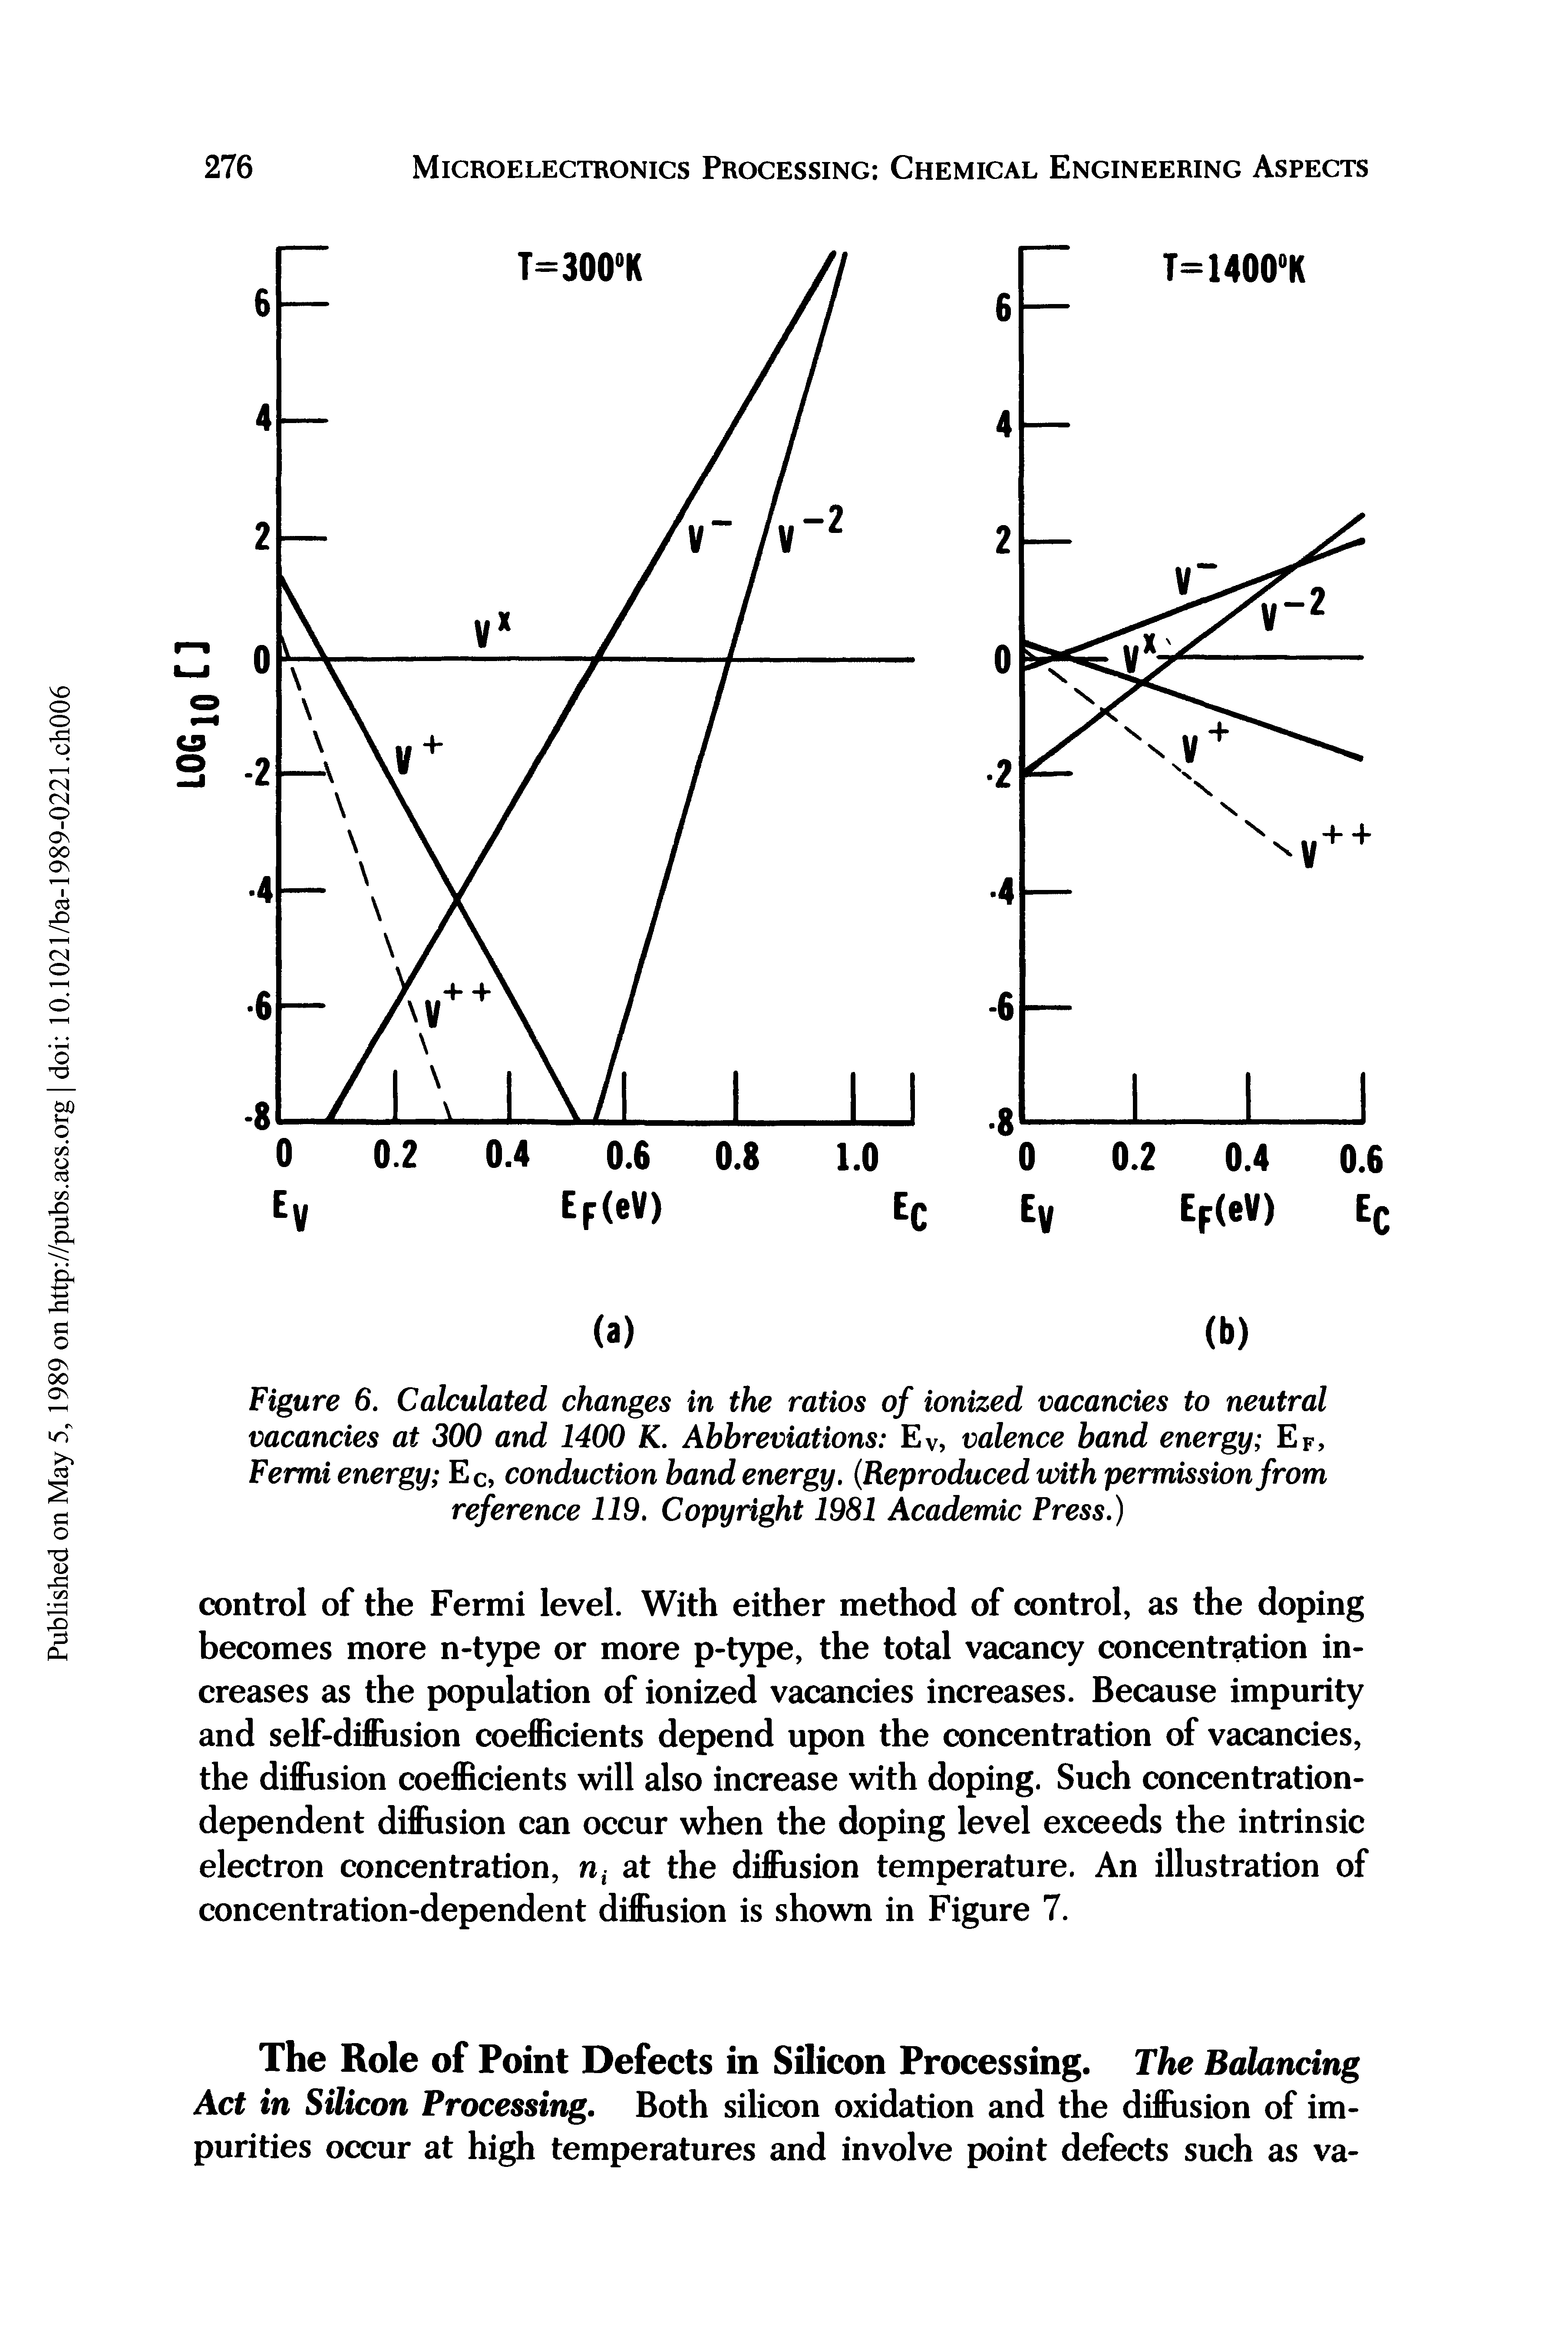 Figure 6. Calculated changes in the ratios of ionized vacancies to neutral vacancies at 300 and 1400 K. Abbreviations Ev, valence band energy EF, Fermi energy Ec, conduction band energy. (Reproduced with permission from reference 119. Copyright 1981 Academic Press.)...